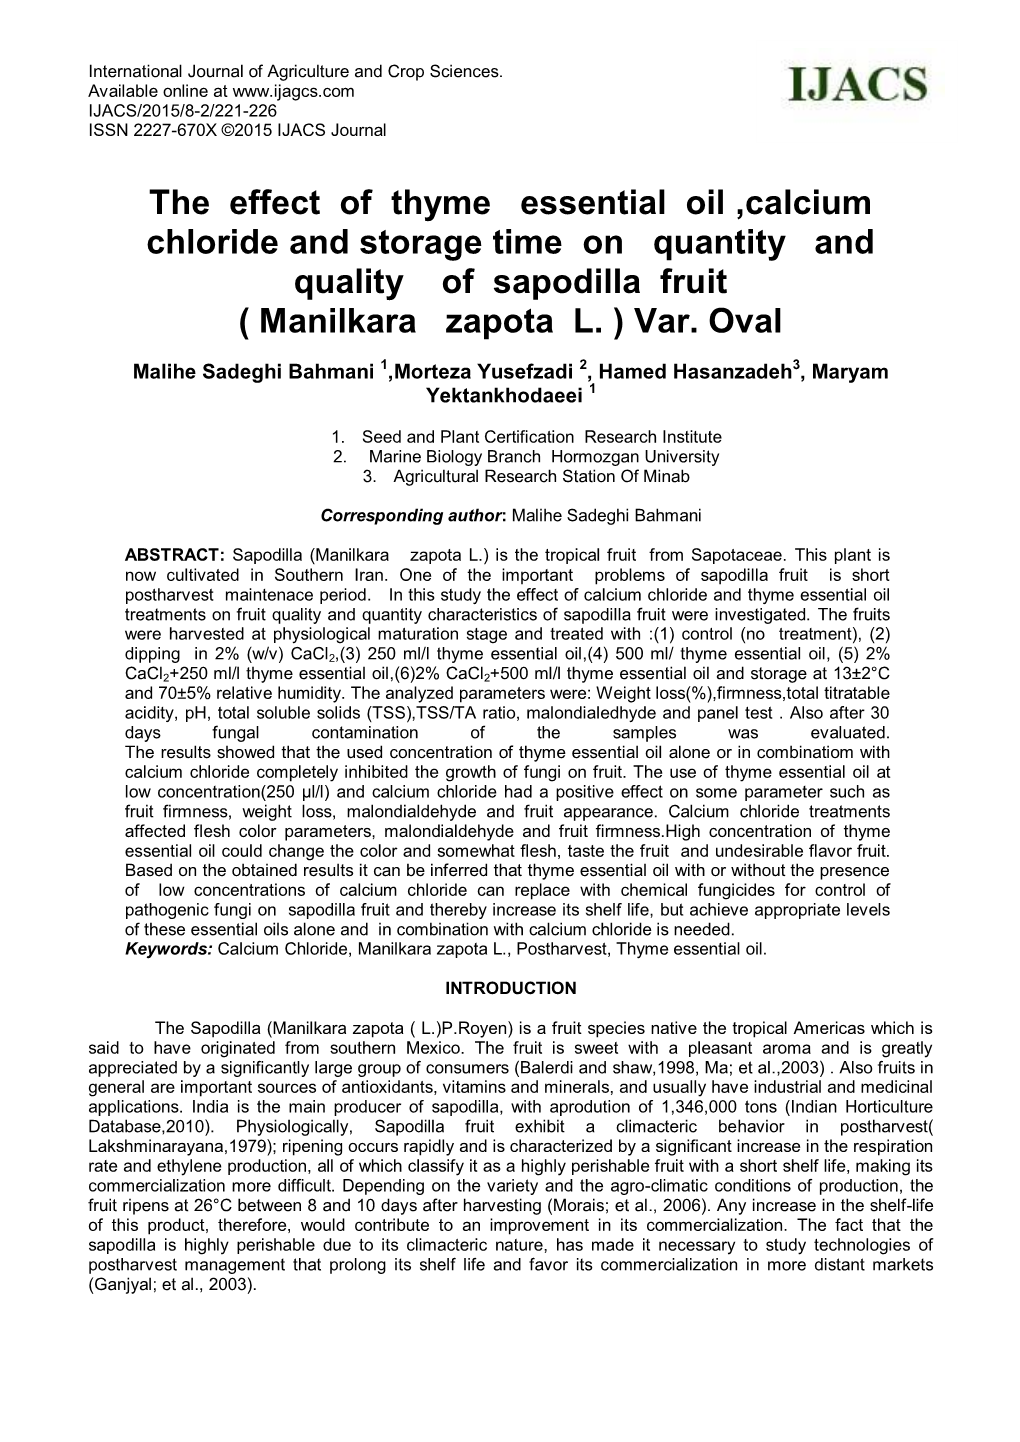 The Effect of Thyme Essential Oil ,Calcium Chloride and Storage Time on Quantity and Quality of Sapodilla Fruit ( Manilkara Zapota L